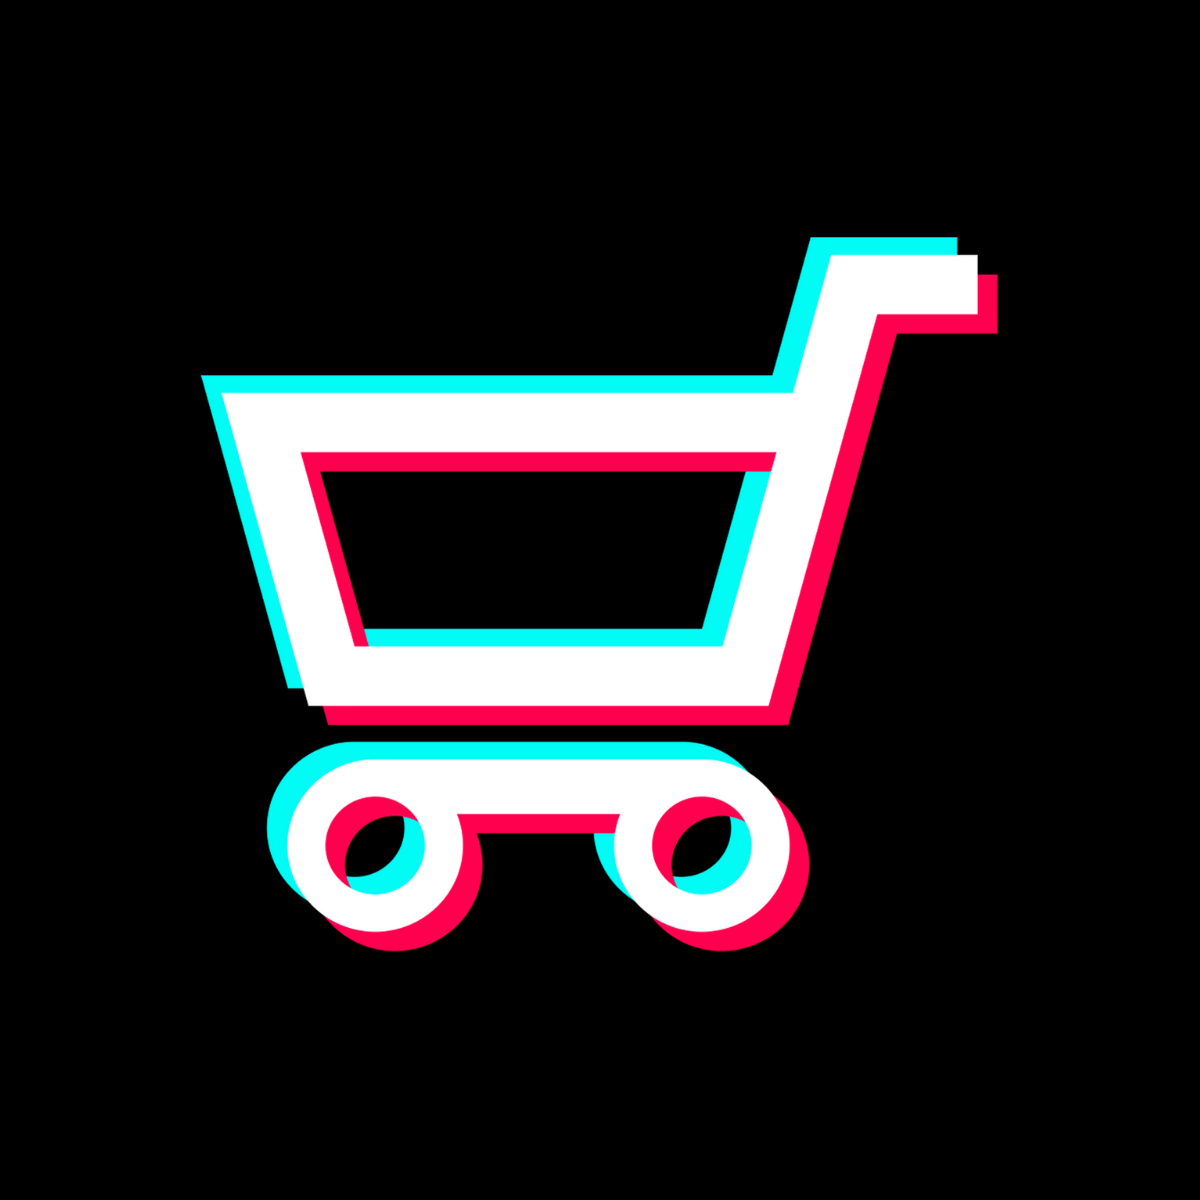 TikTok Shoppable Feed by Vop